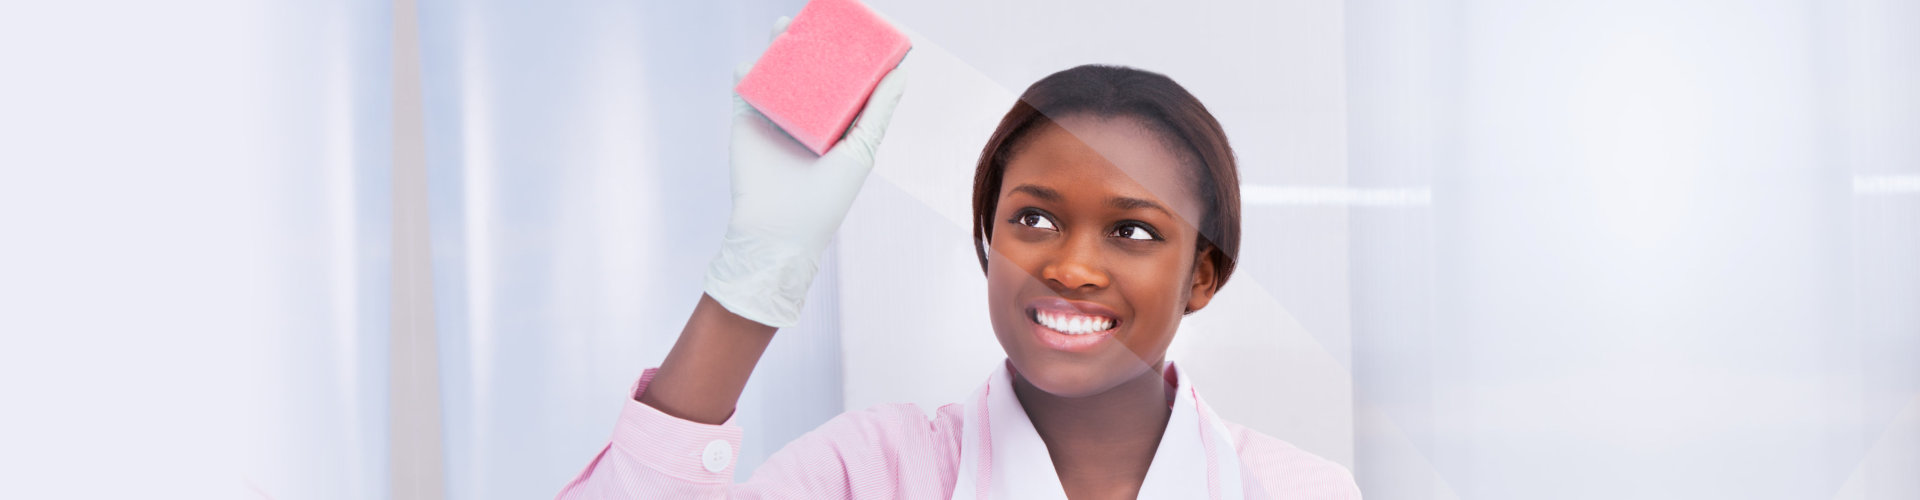 woman in pink smiling while cleaning the glass